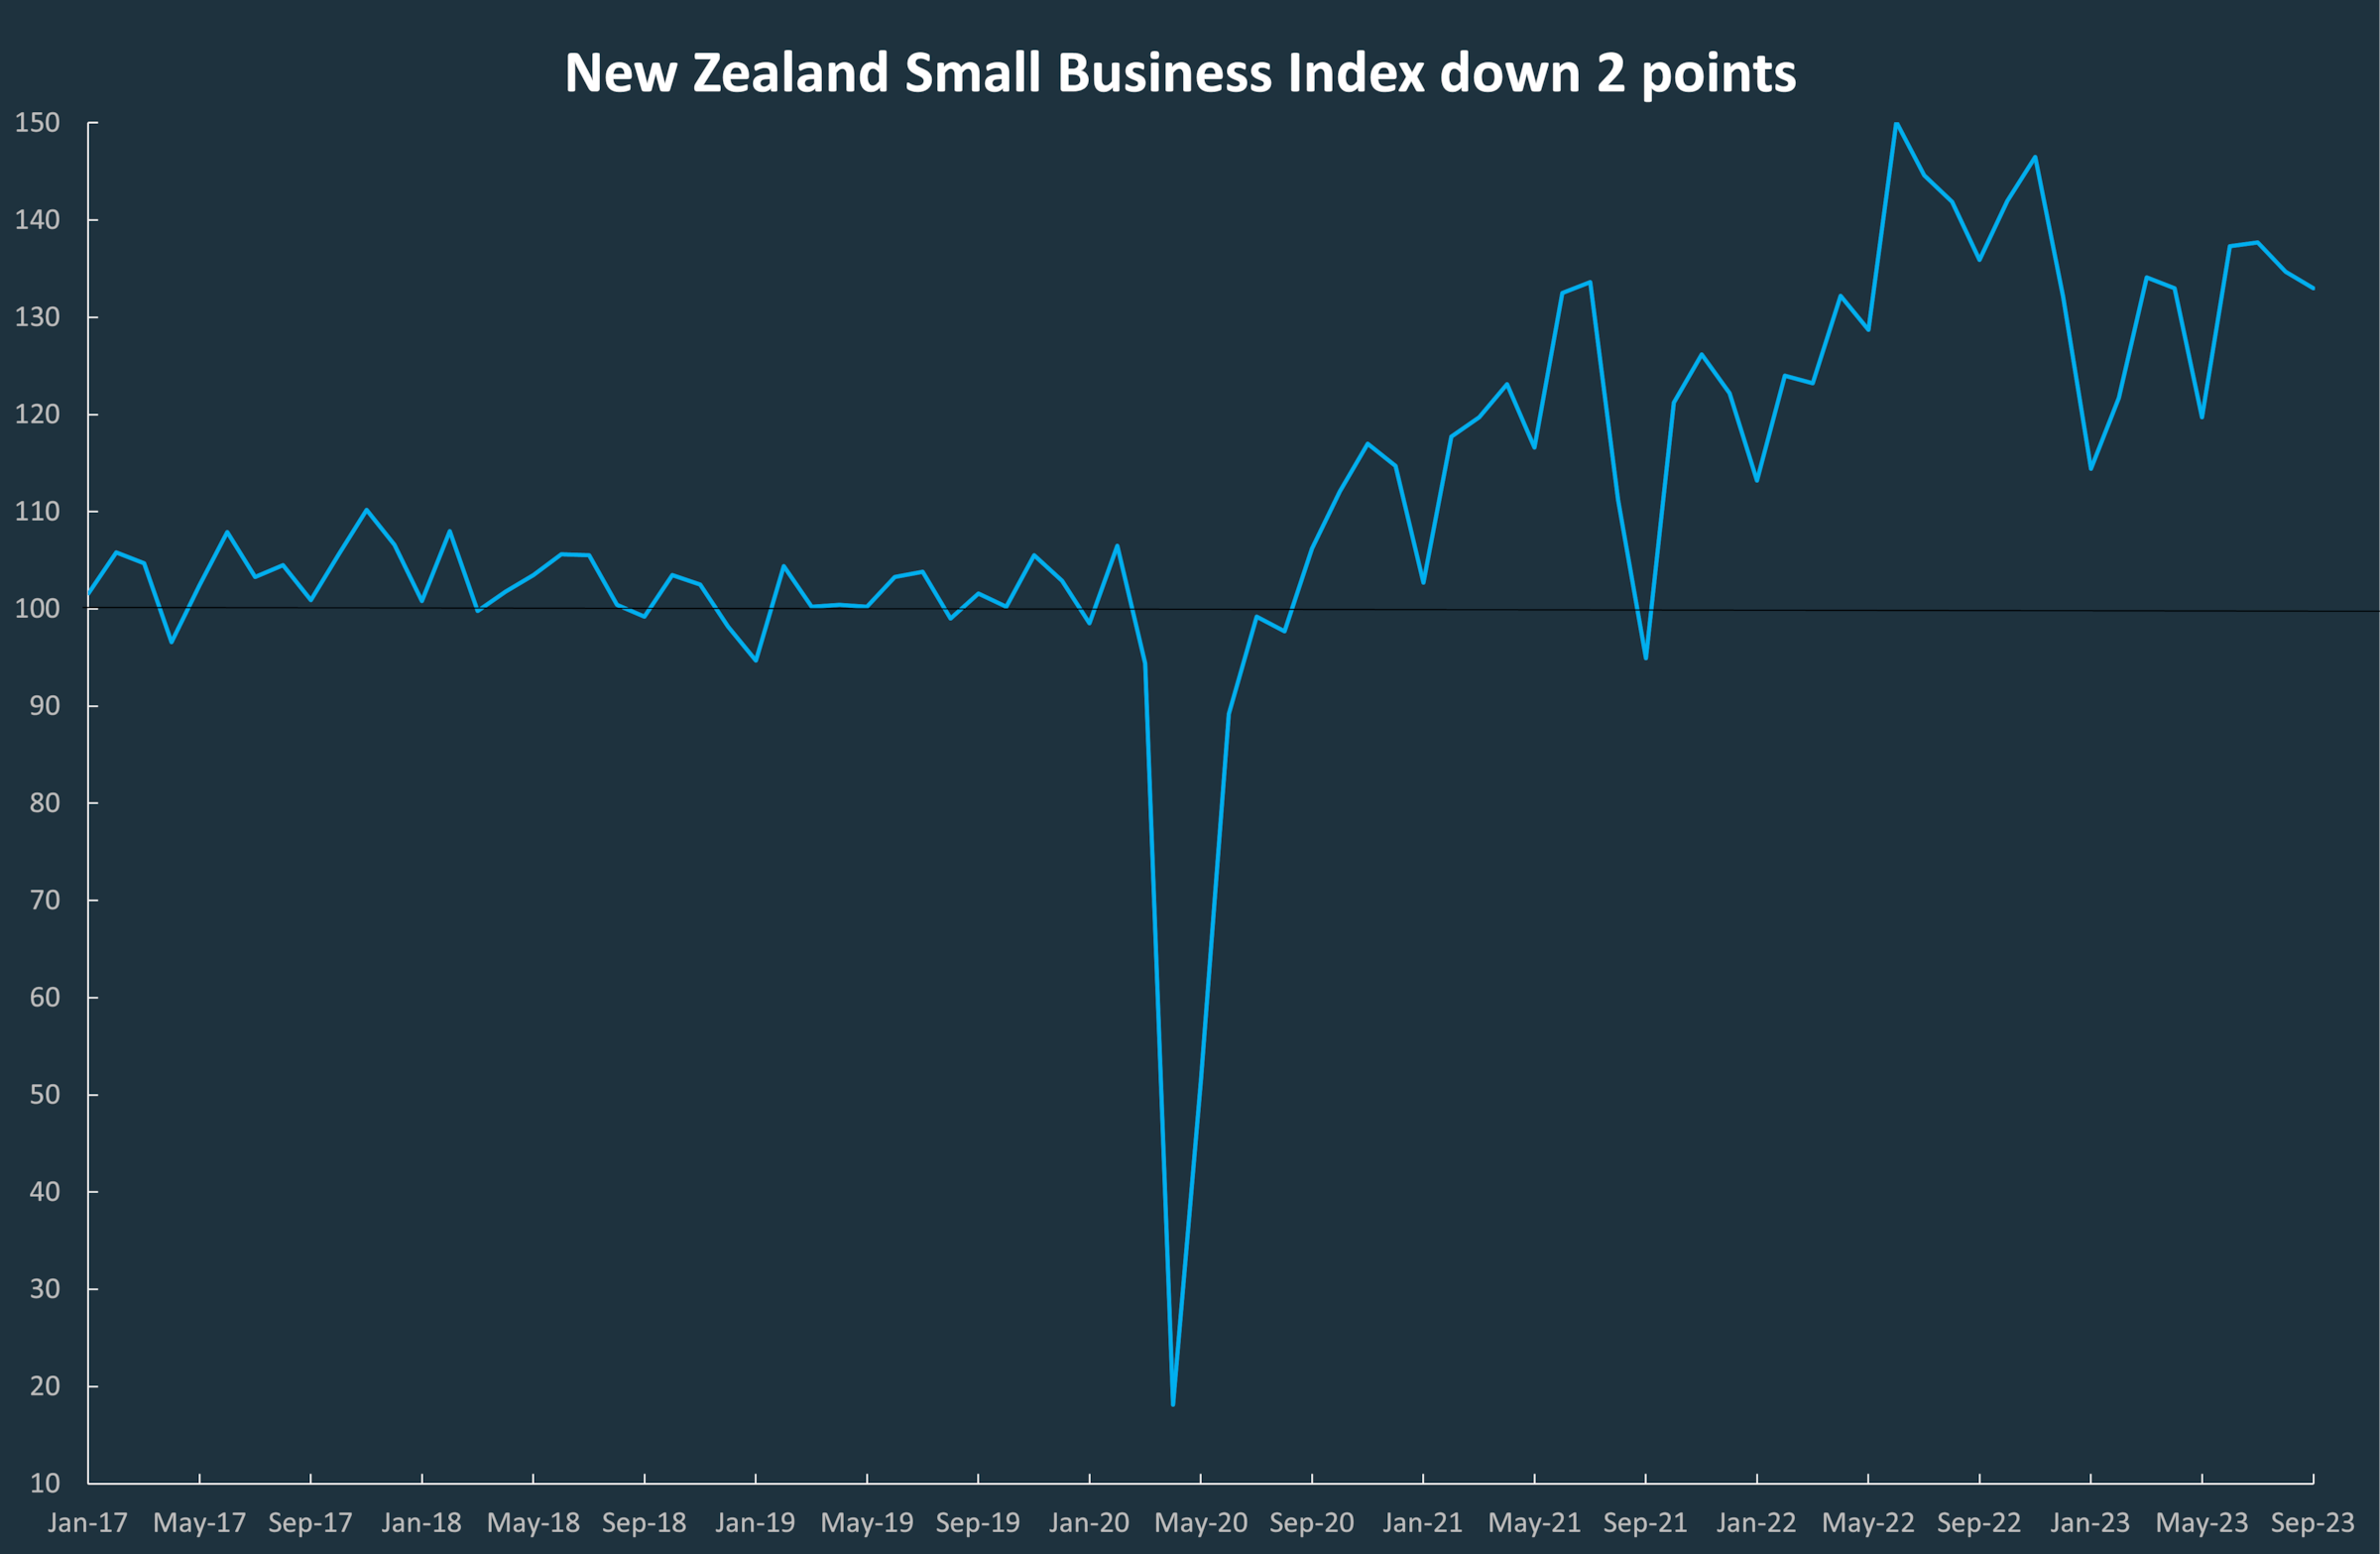 A line graph showing the ups and downs in the New Zealand Small Business Index since January 2017.